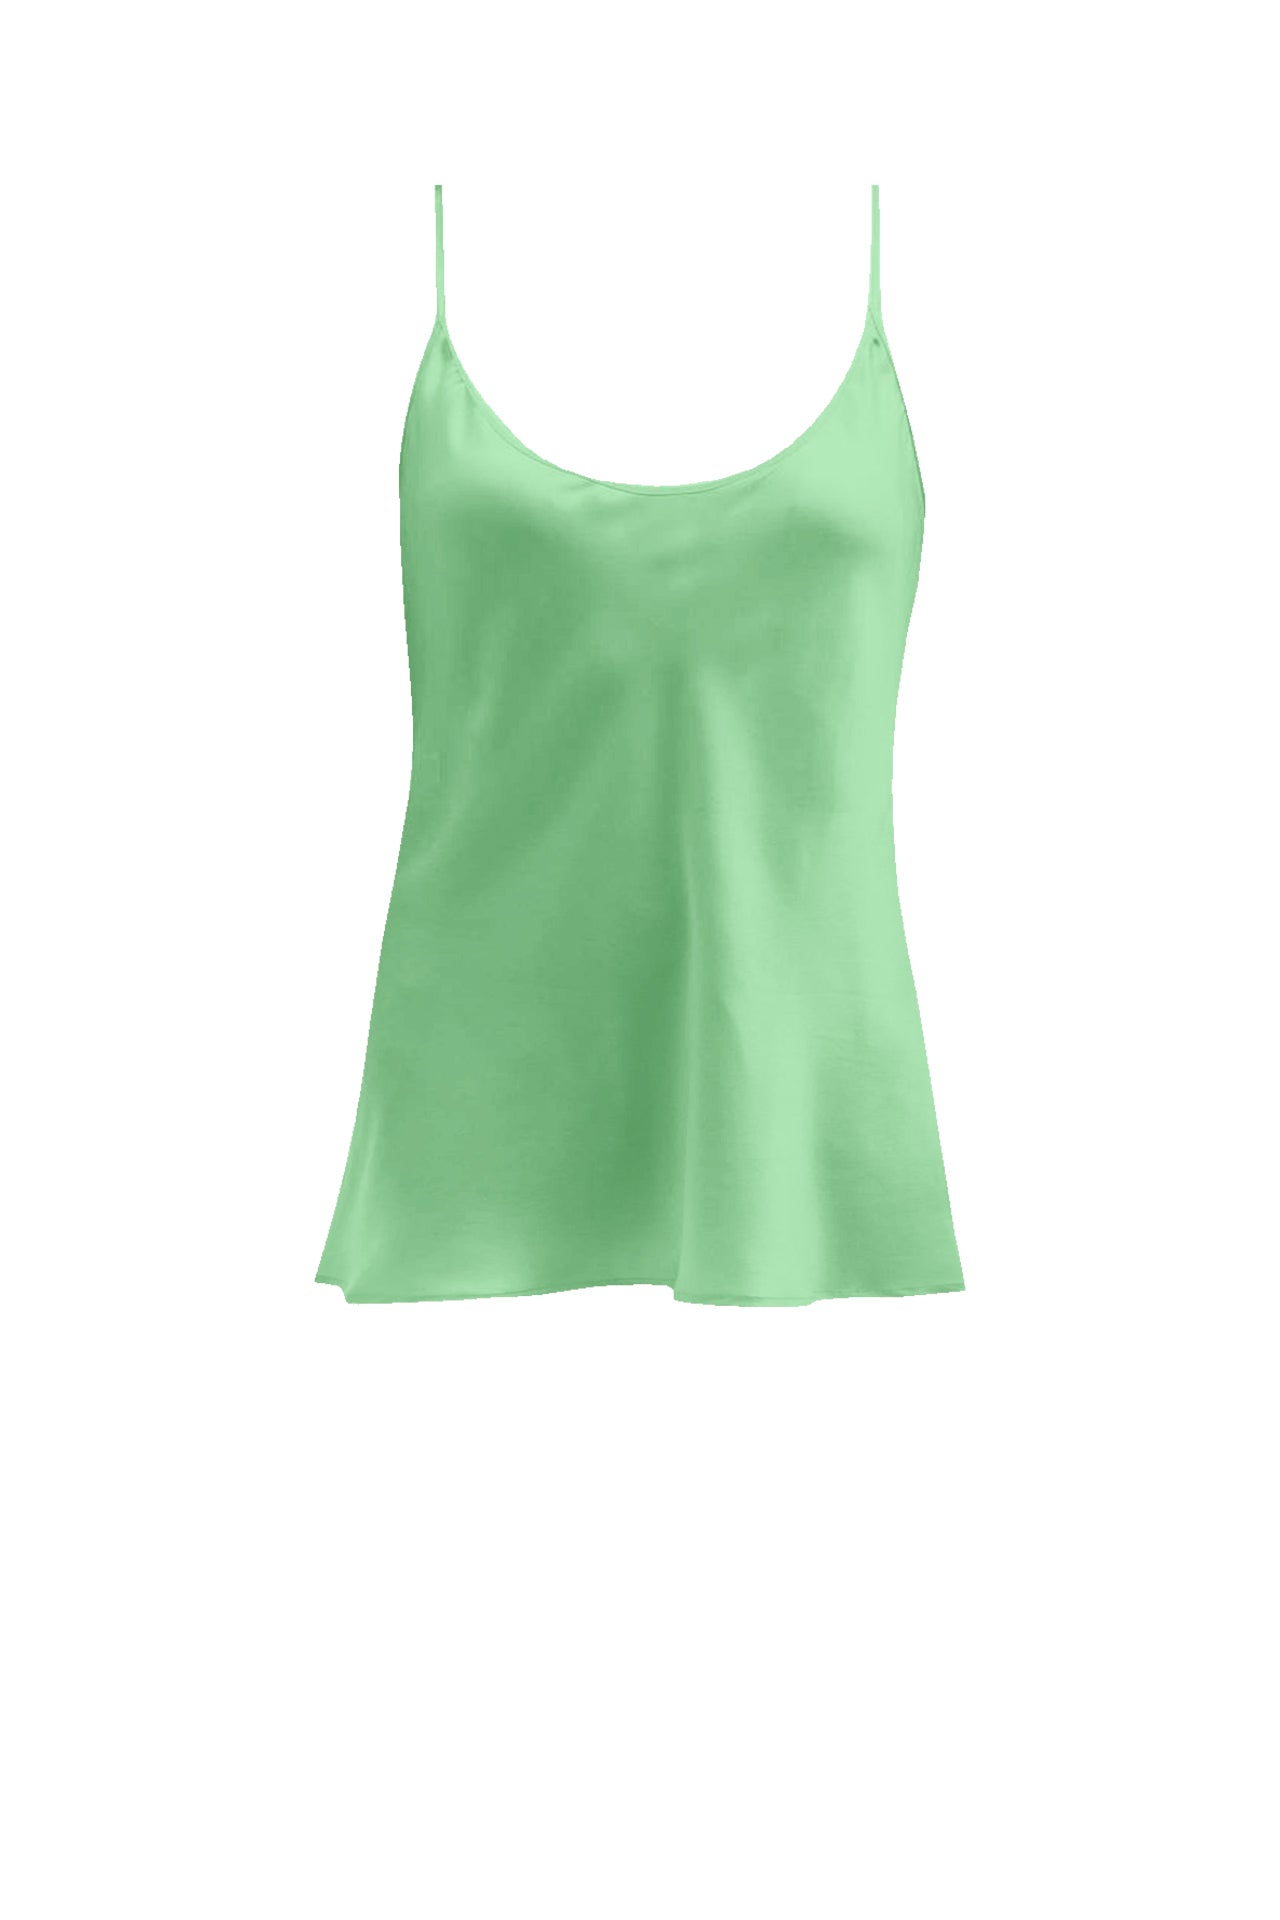 "mint green camisole" "Kyle X Shahida" "camisole tops for ladies" "green cami top"